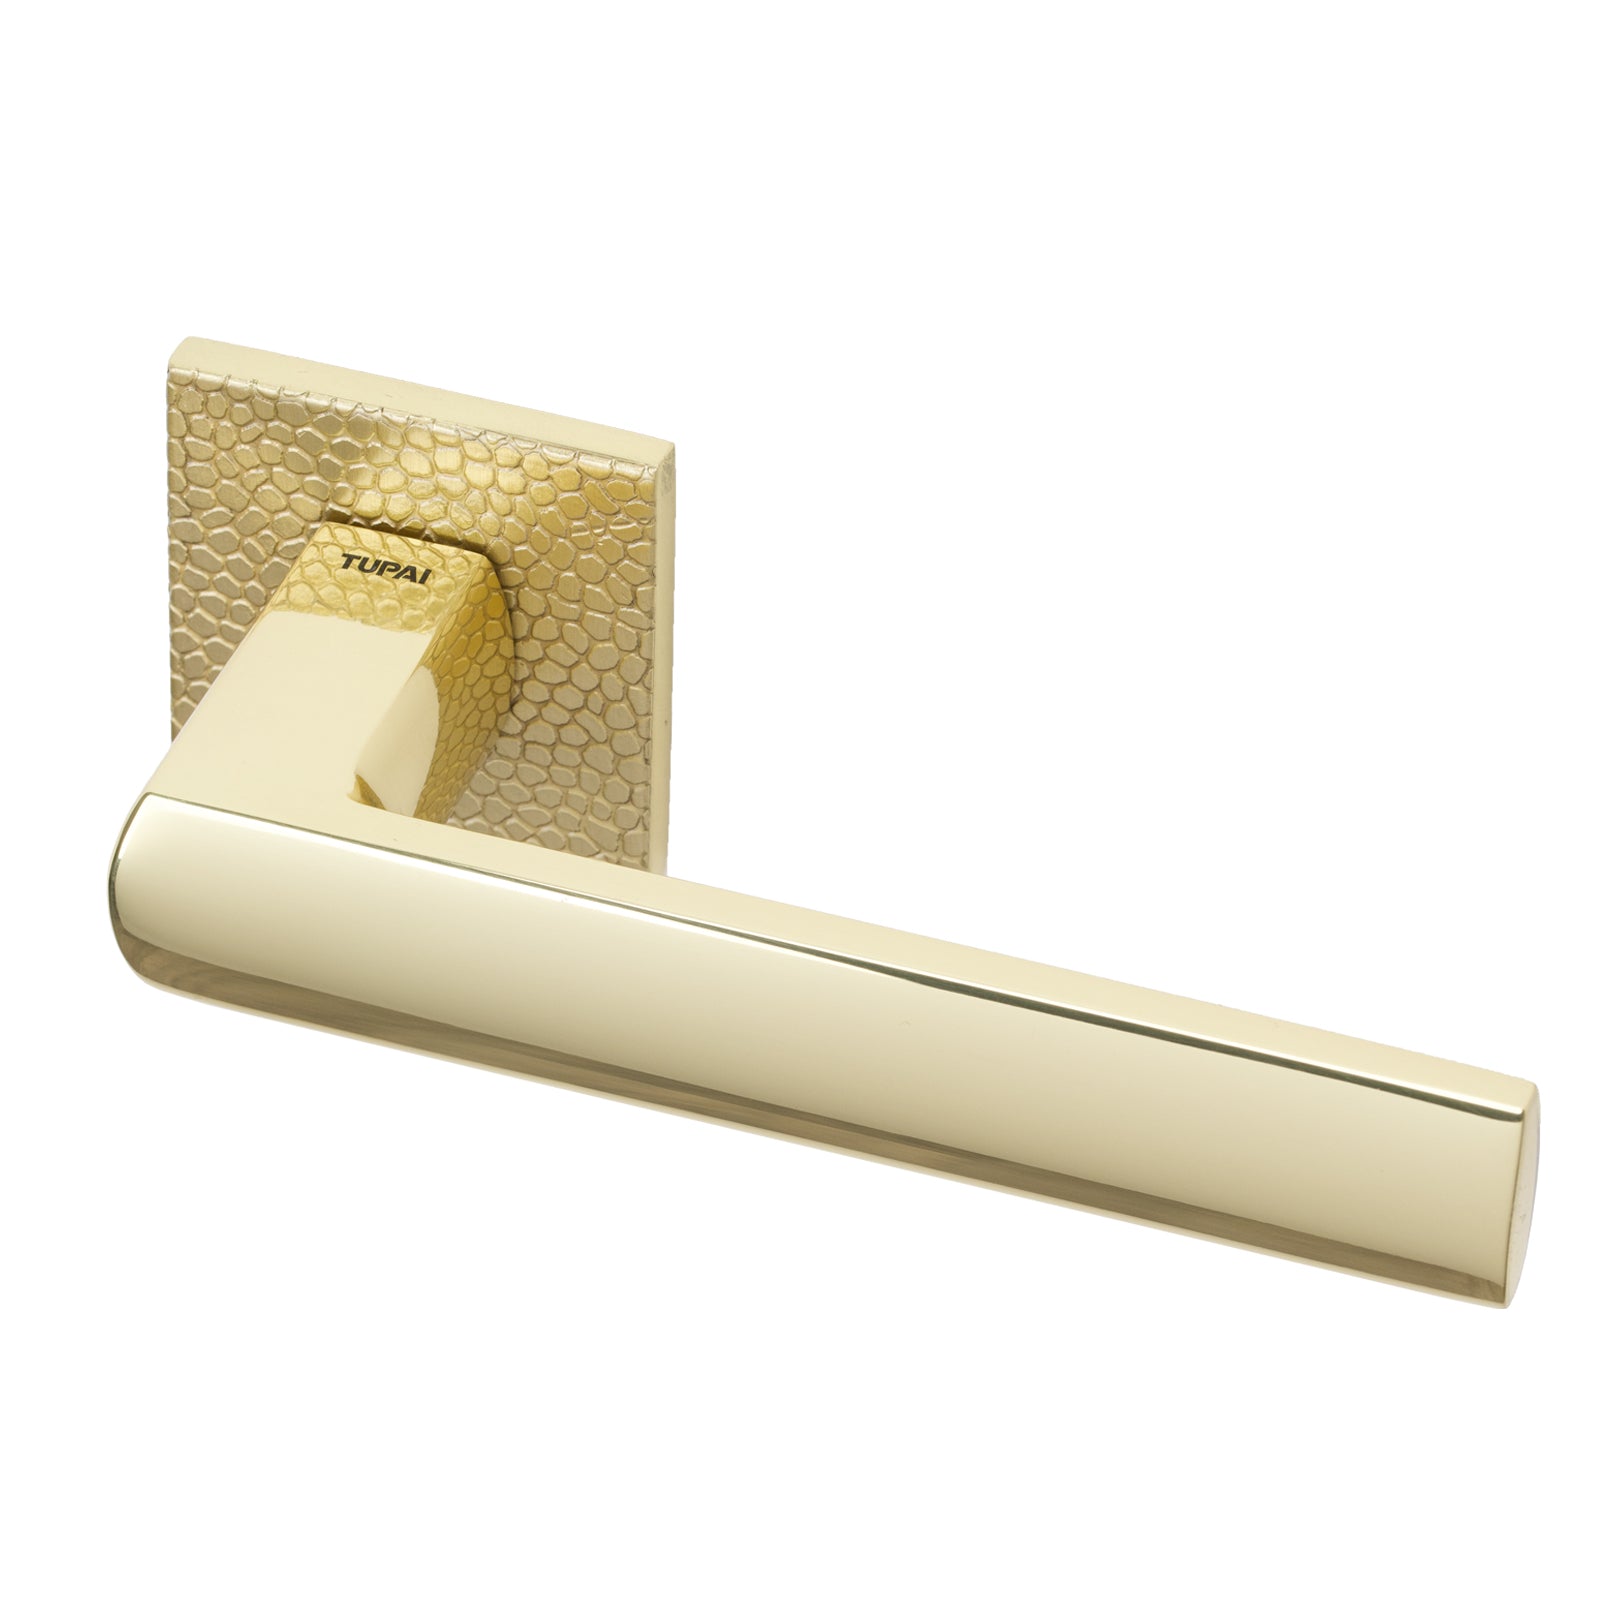 Coroto Pebbles Texture Lever on Rose Door Handle in Satin/Polished Brass Finish SHOW